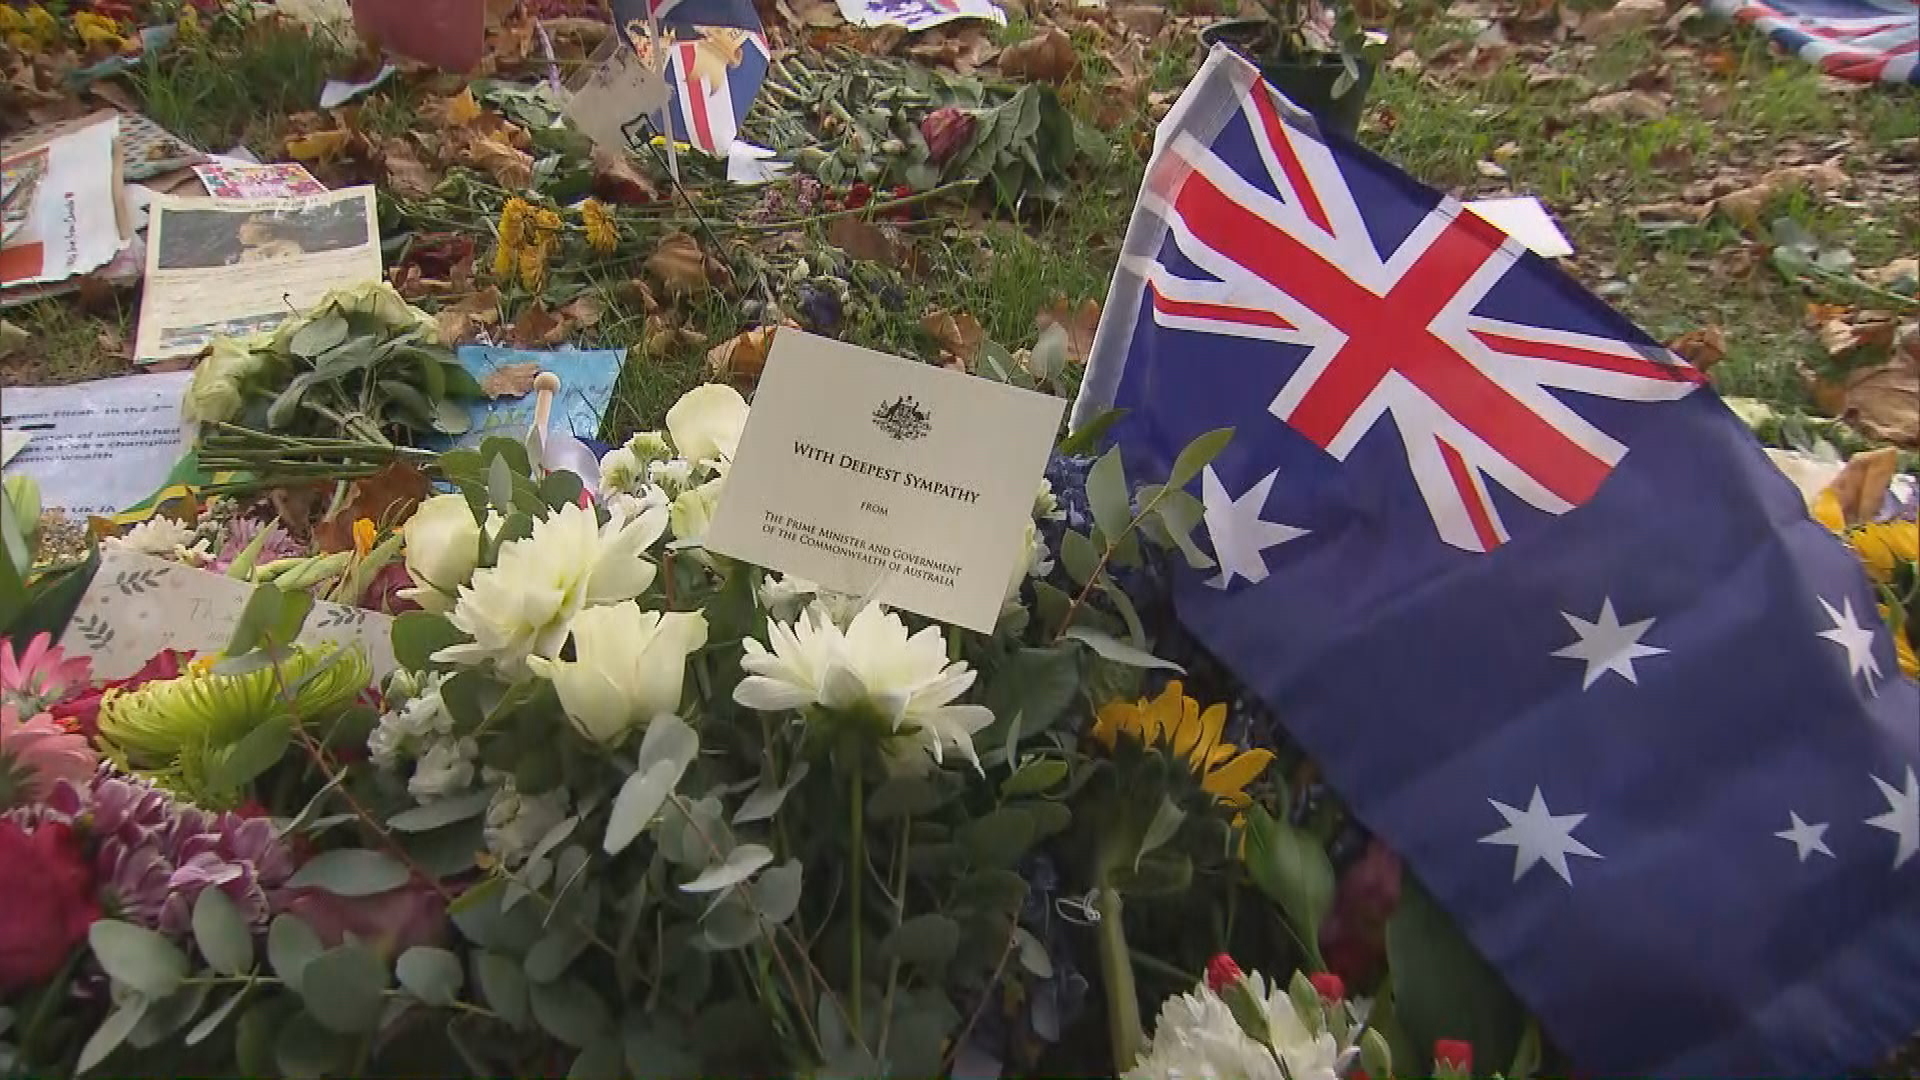 The bouquet included eucalypts leaves for an Australian touch and a card which conveyed Australia's "deepest sympathy".